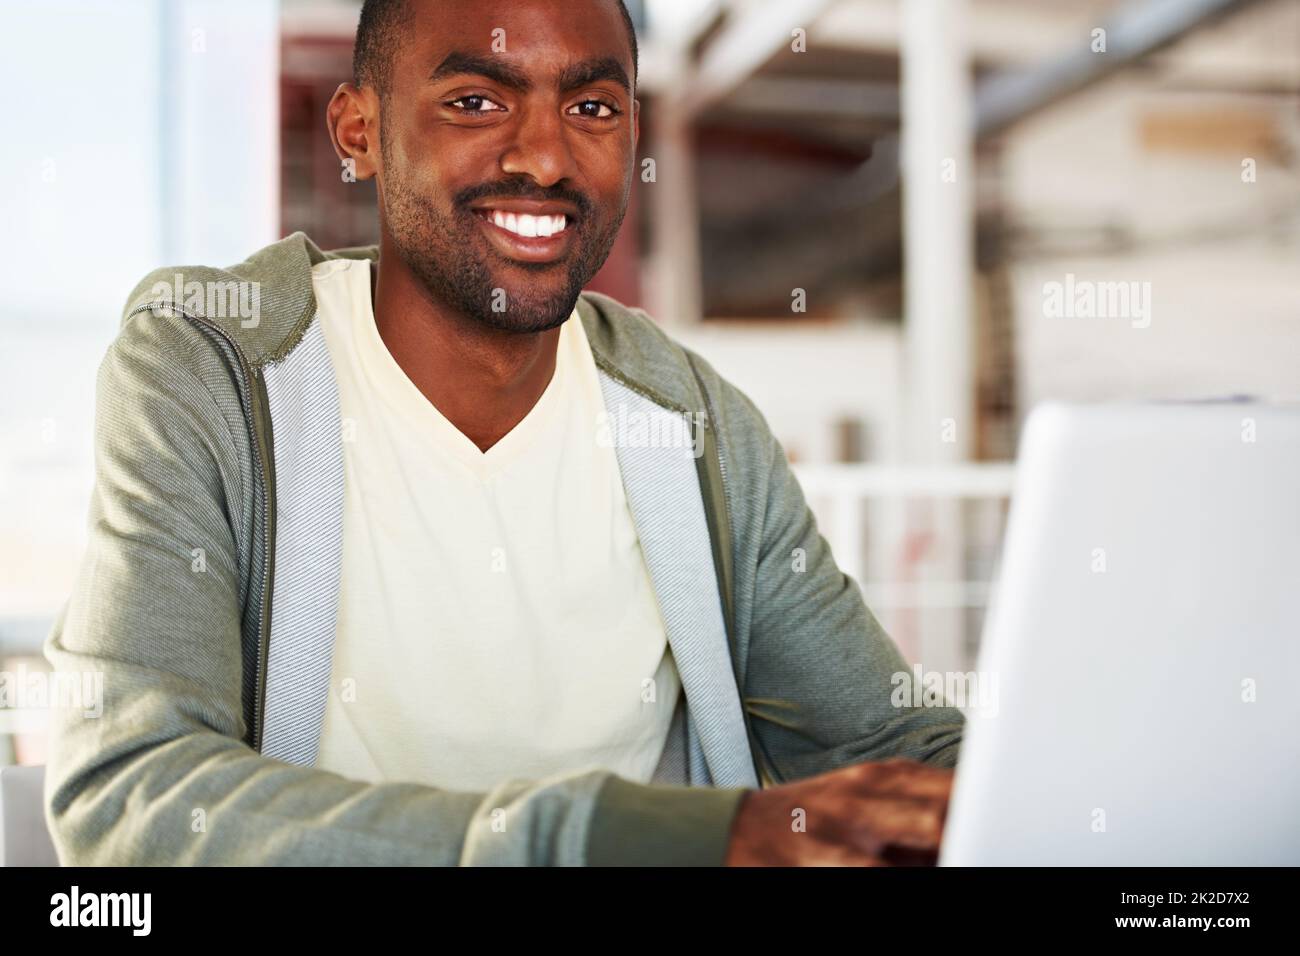 Loving his job. Portrait of a young african man working on his laptop. Stock Photo